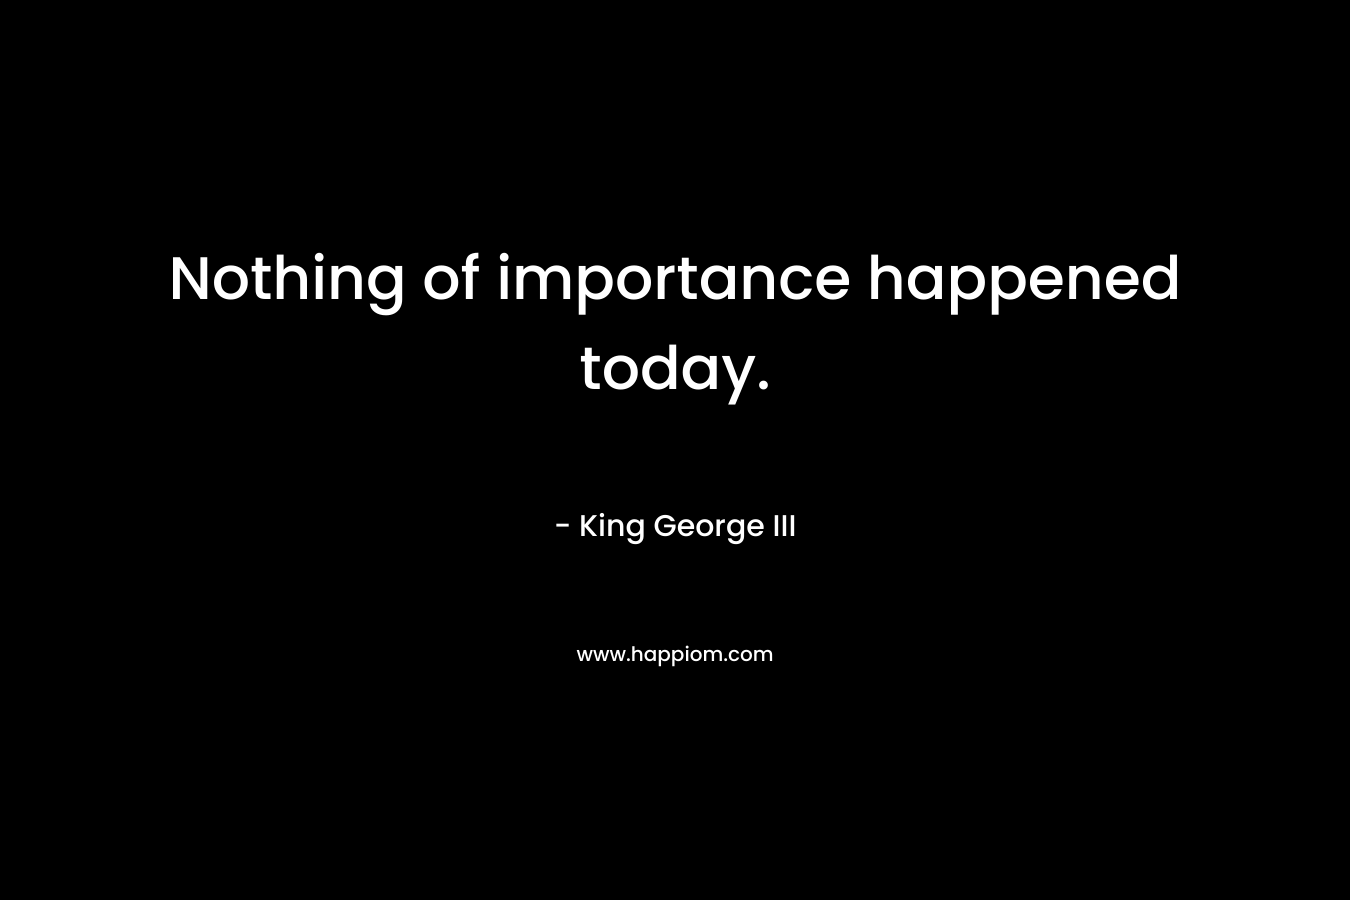 Nothing of importance happened today.